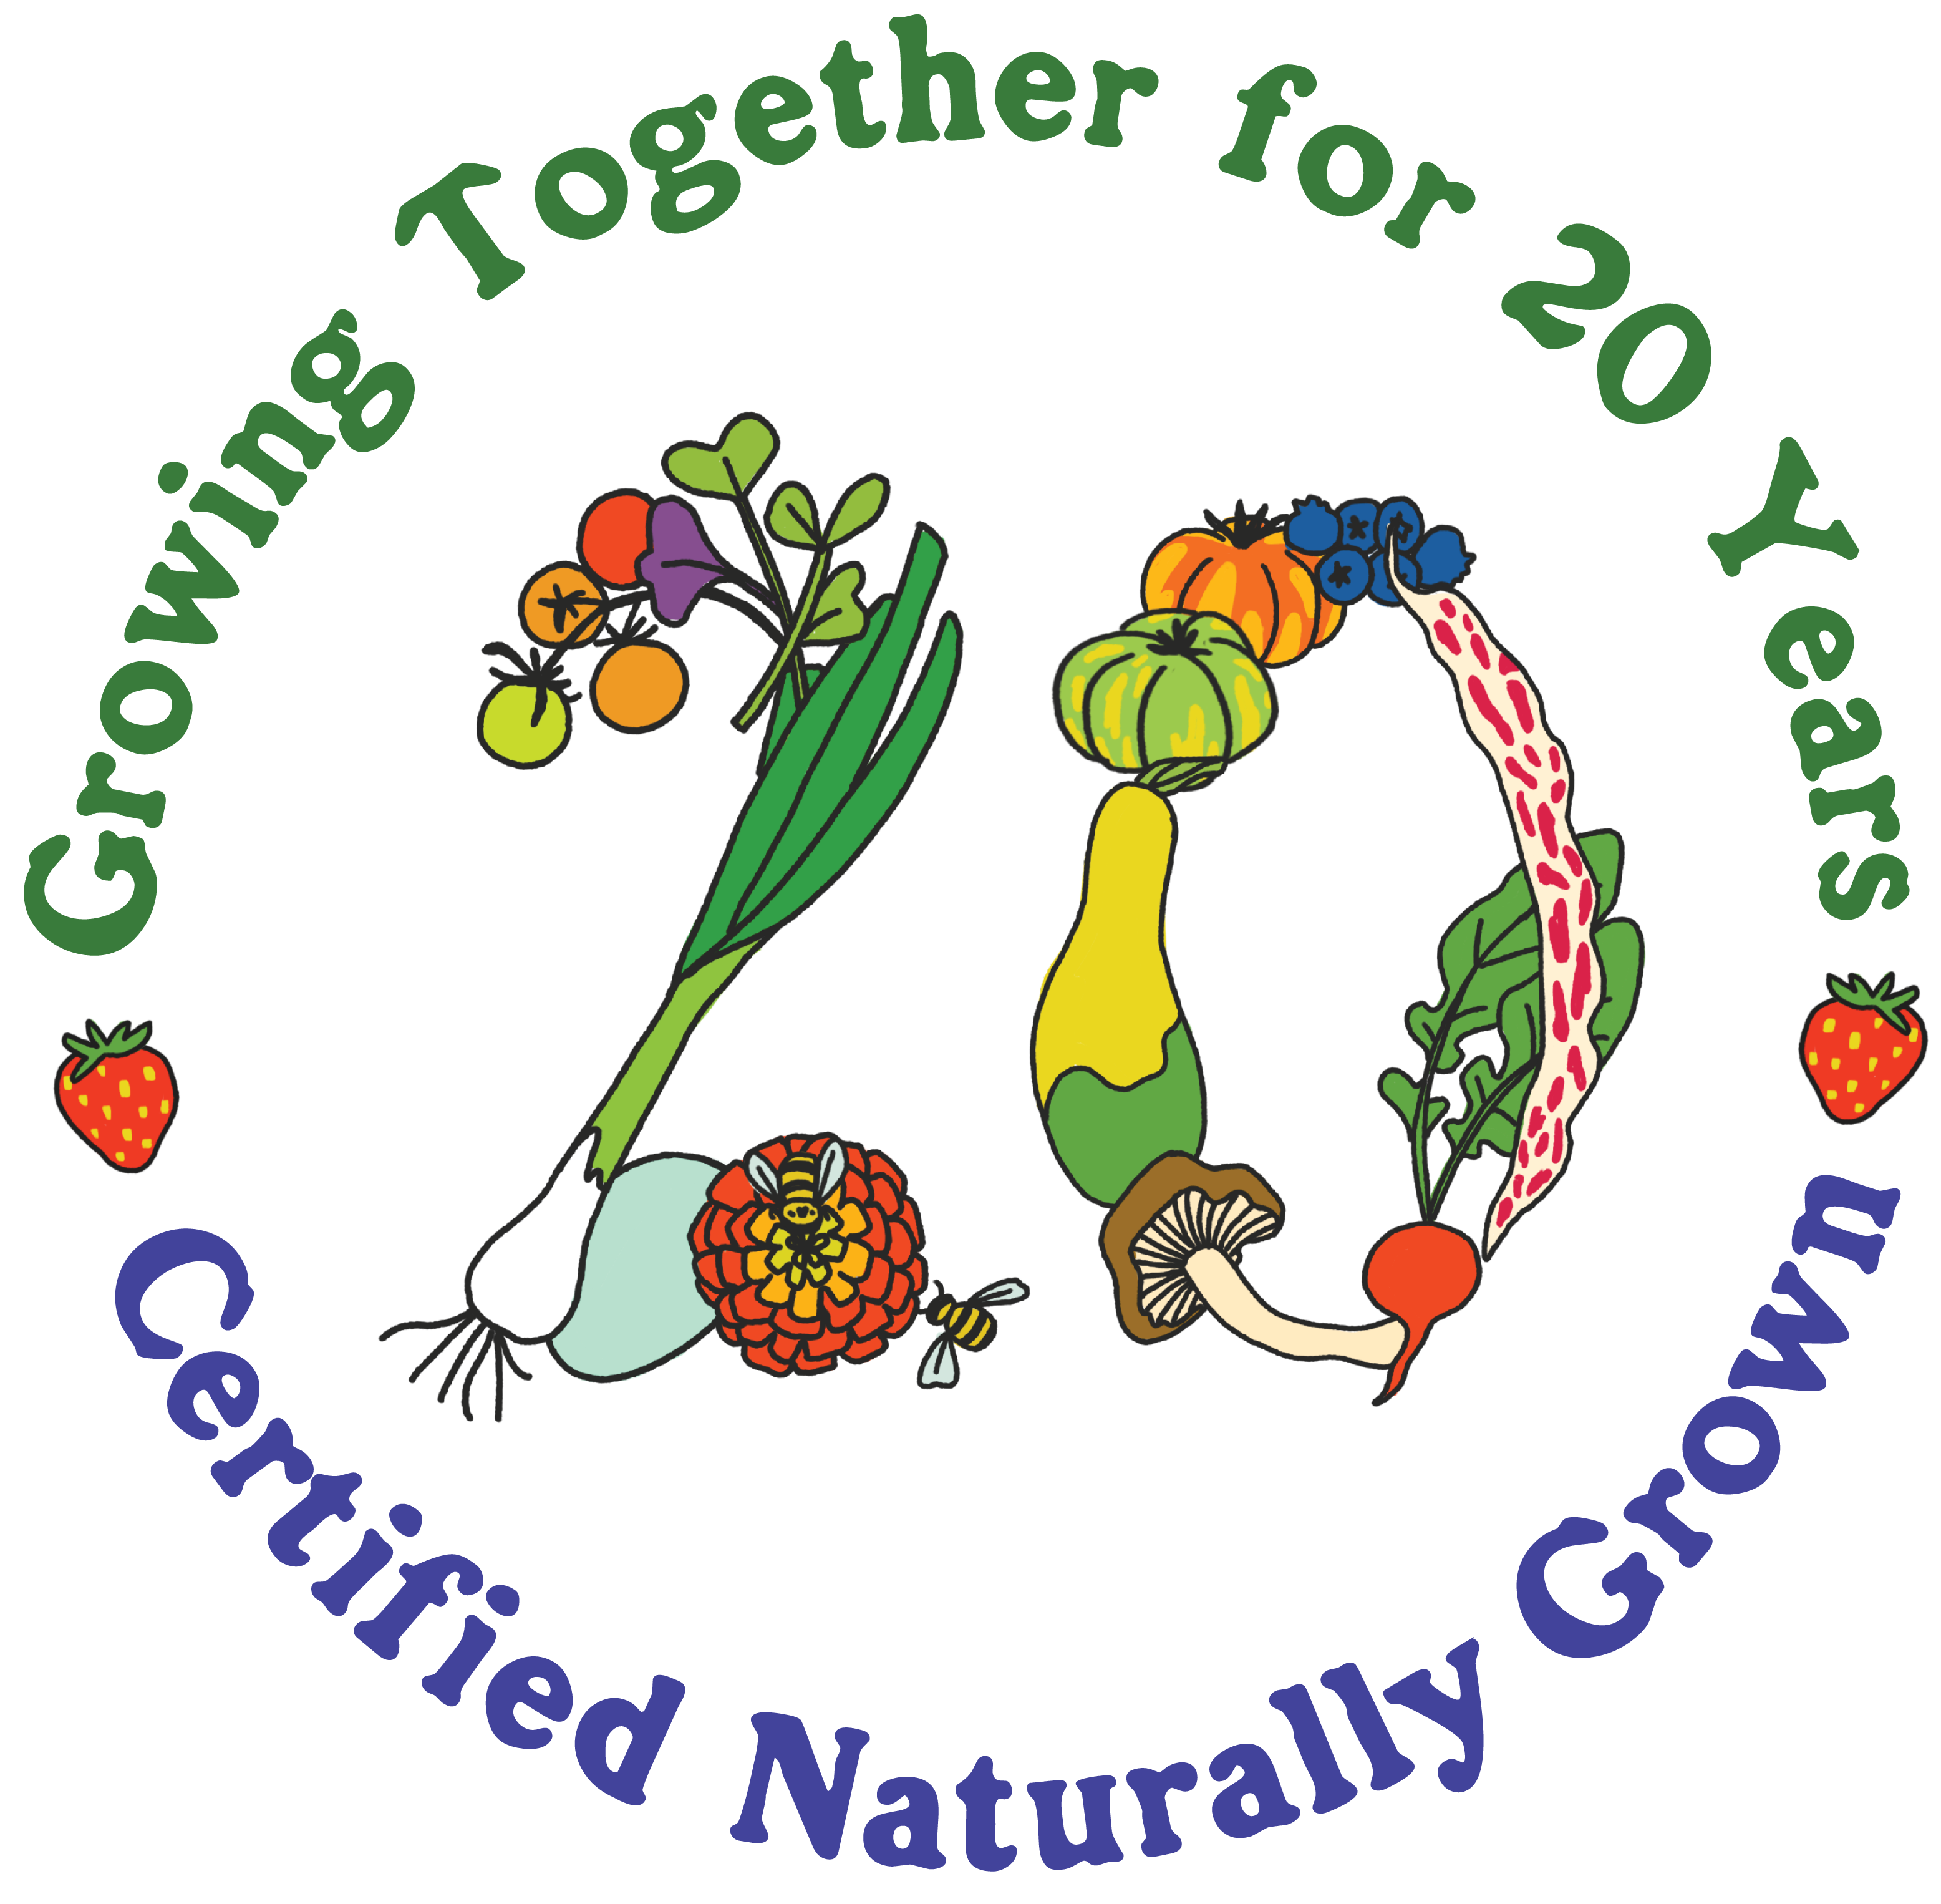 Certified Naturally Grown - Growing Together for 20 Years